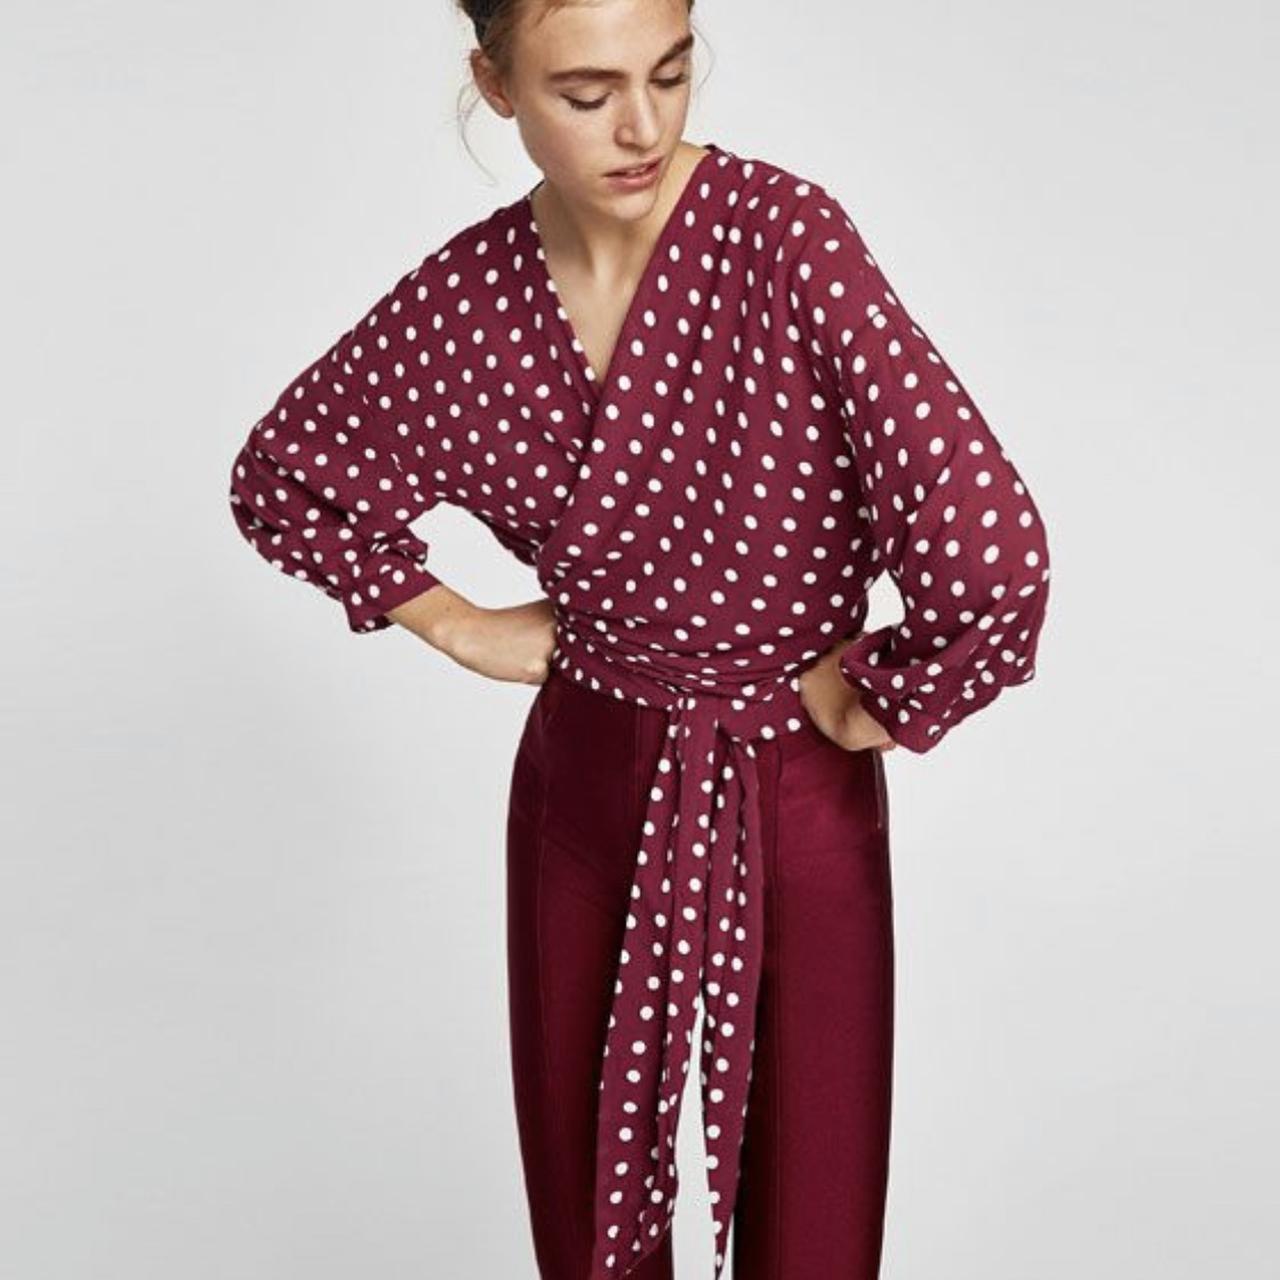 Zara Polka-dot Blouse with Bow Detail in Maroon — UFO No More